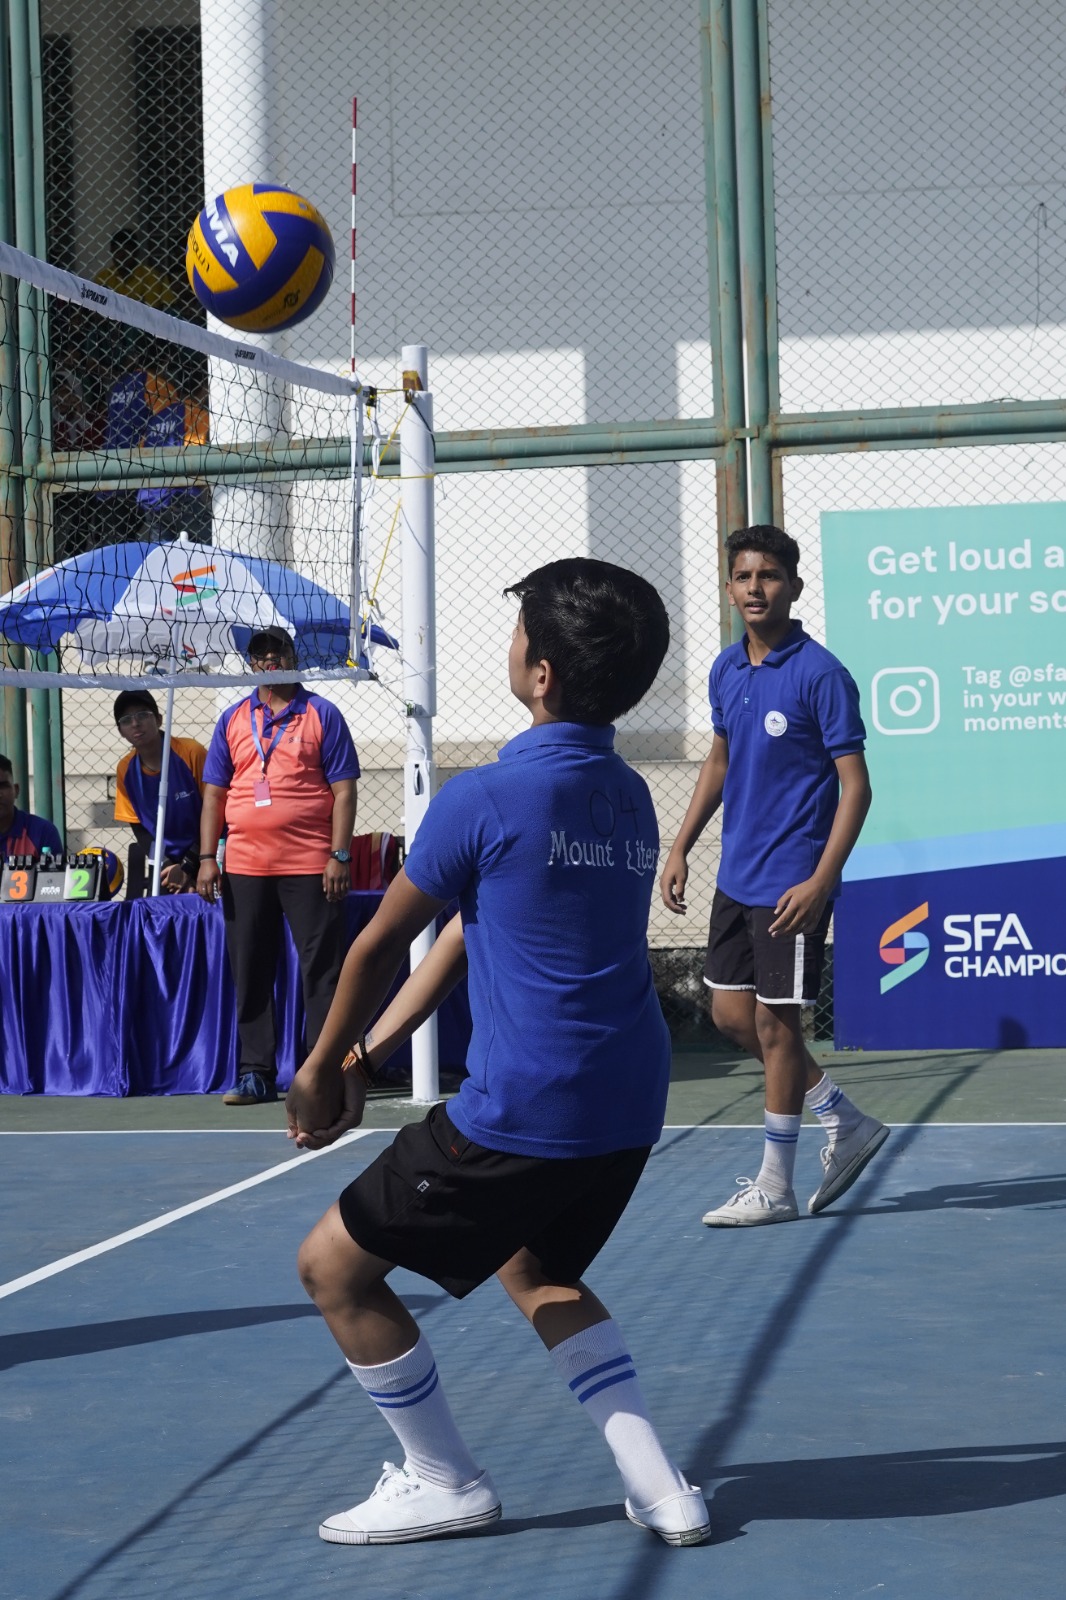 Volleyball remained the center of attraction on the third day of SFA Championship in Dehradun.